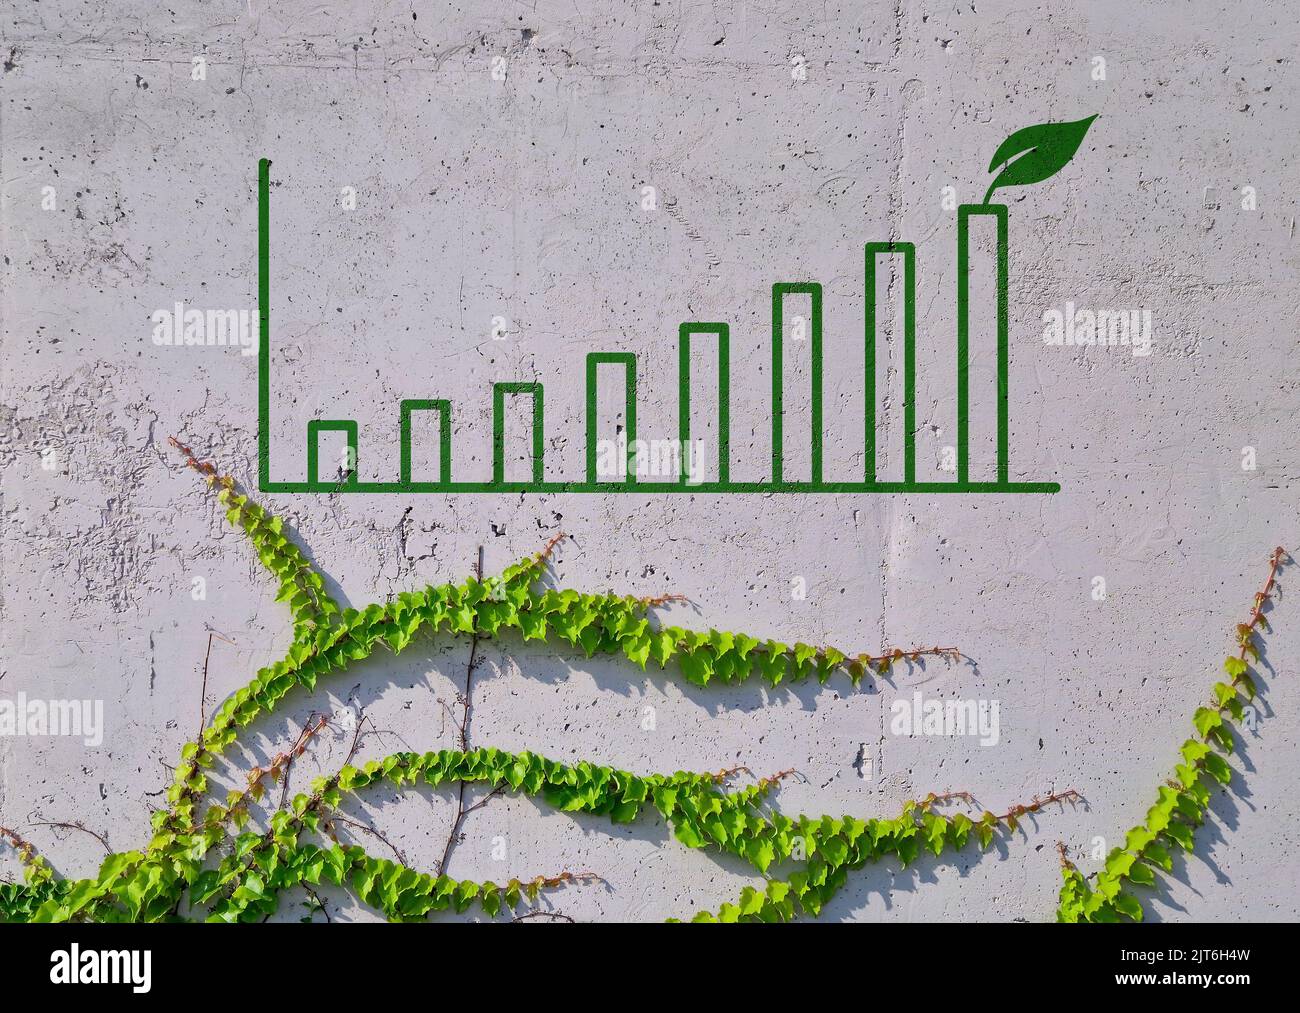 Business chart on a concrete wall and leaves. Impact Investing concept. Stock Photo